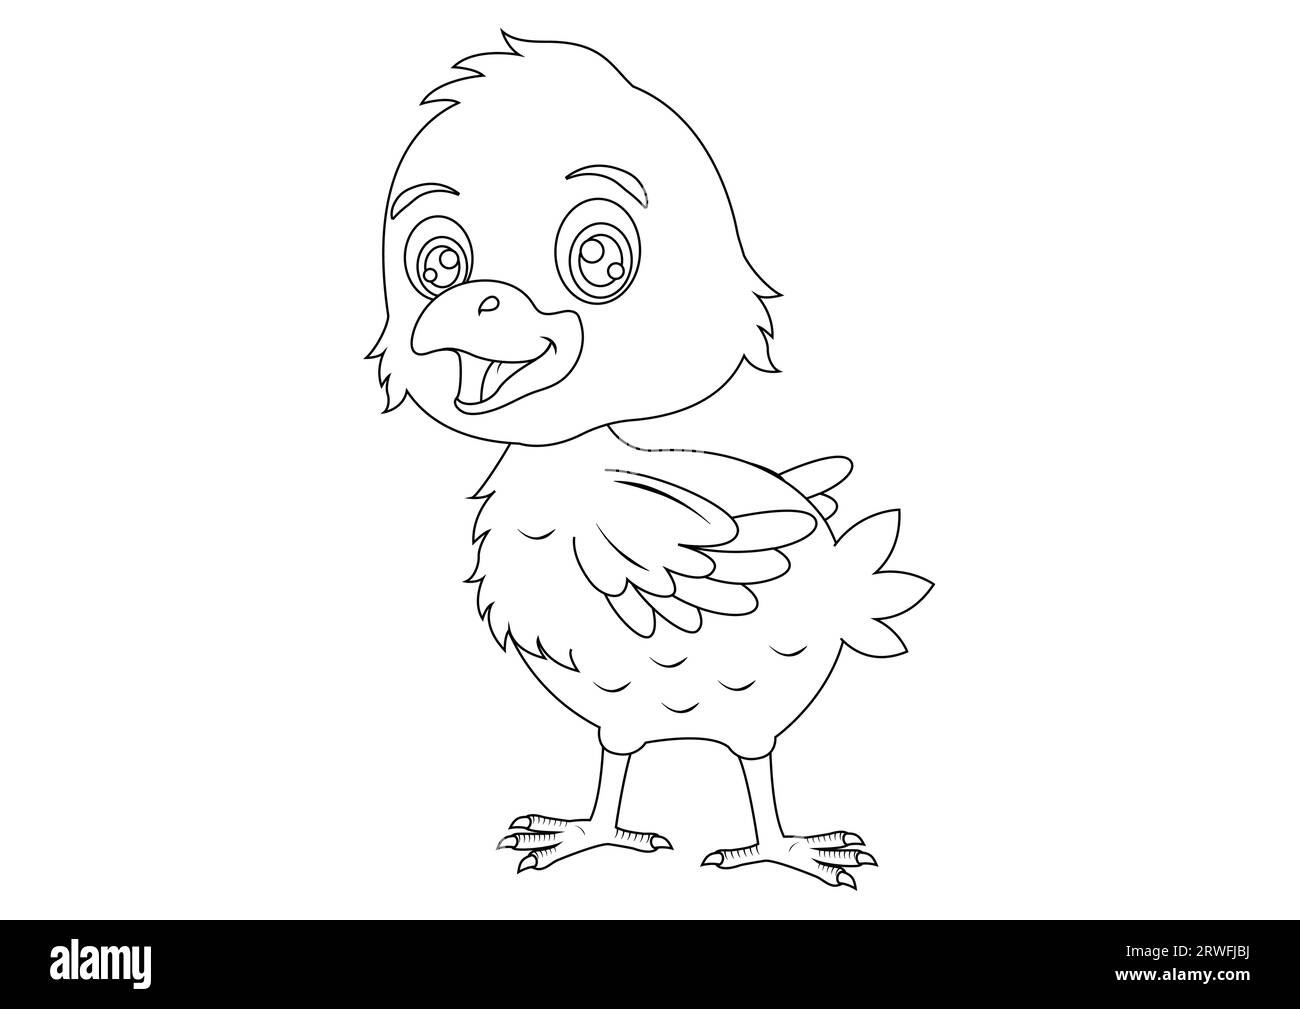 Black and white baby chicken cartoon character vector illustration. Coloring page of baby chicken Stock Vector